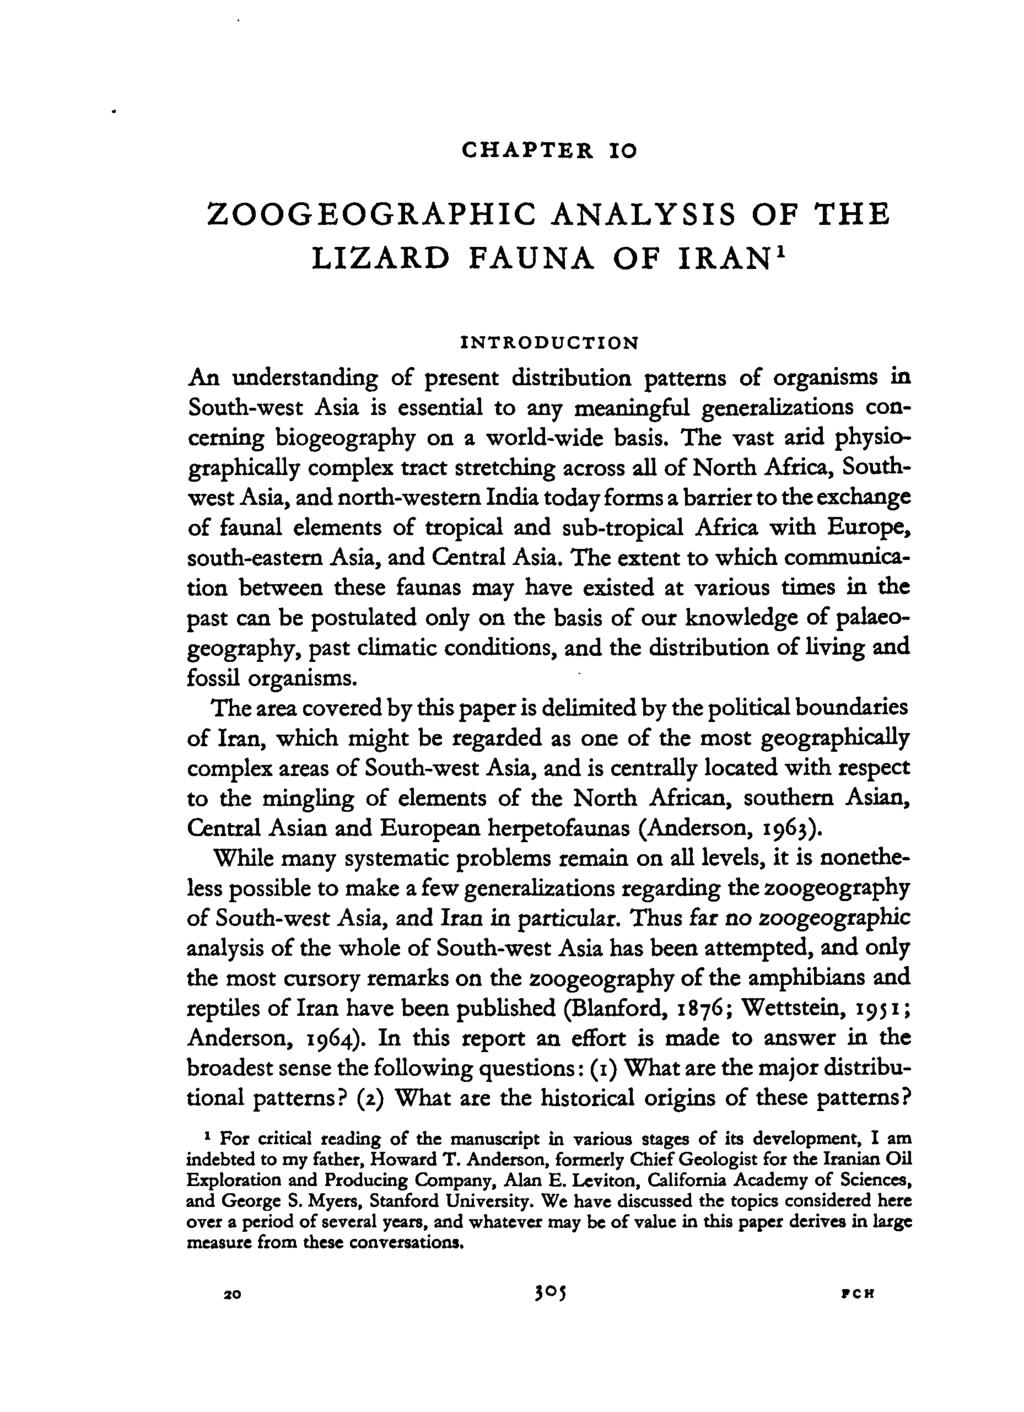 CHAPTER IO ZOOGEOGRAPHIC ANALYSIS OF THE LIZARD FAUNA OF IRAN 1 Anderson, S.C. INTRODUCTION An understanding of present distribution patterns of organisms in South-west Asia is essential to any meaningful generalizations concerning biogeography on a world-wide basis.